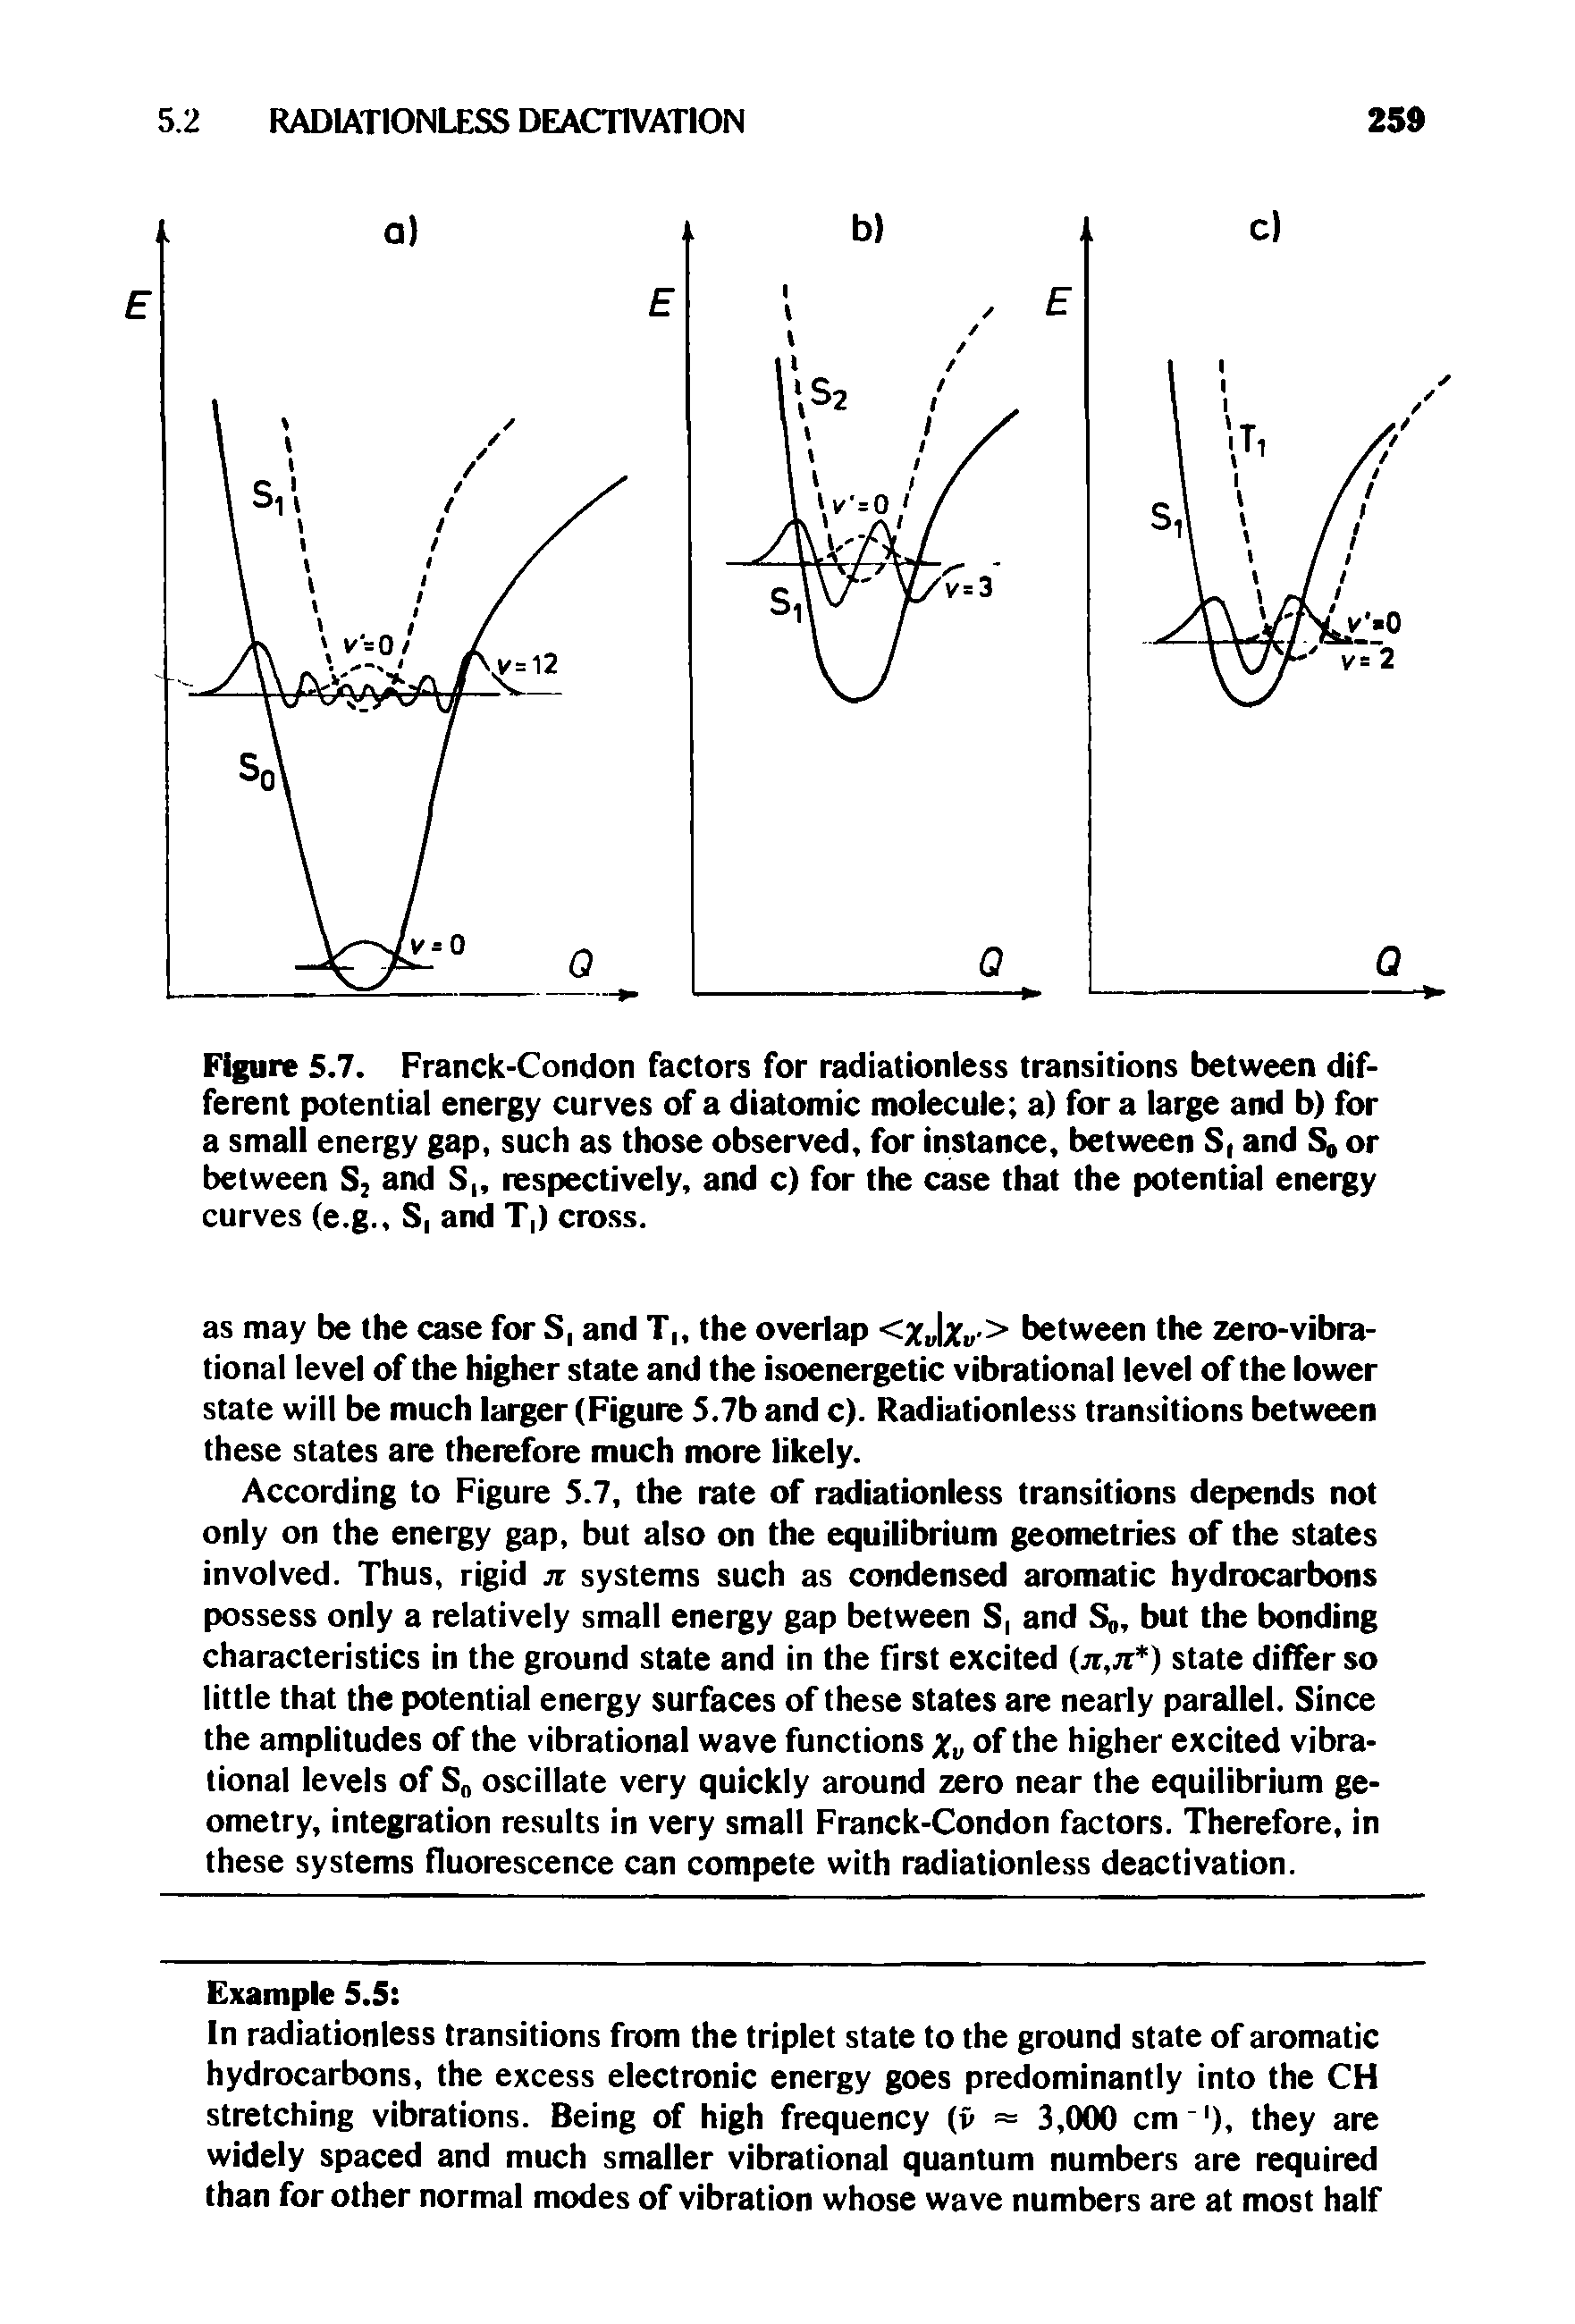 Figure 5.7. Franck-Condon factors for radiationless transitions between different potential energy curves of a diatomic molecule a) for a large and b) for a small energy gap, such as those observed, for instance, between S and S, or between S, and S respectively, and c) for the case that the potential energy curves (e.g., S, and T,) cross.